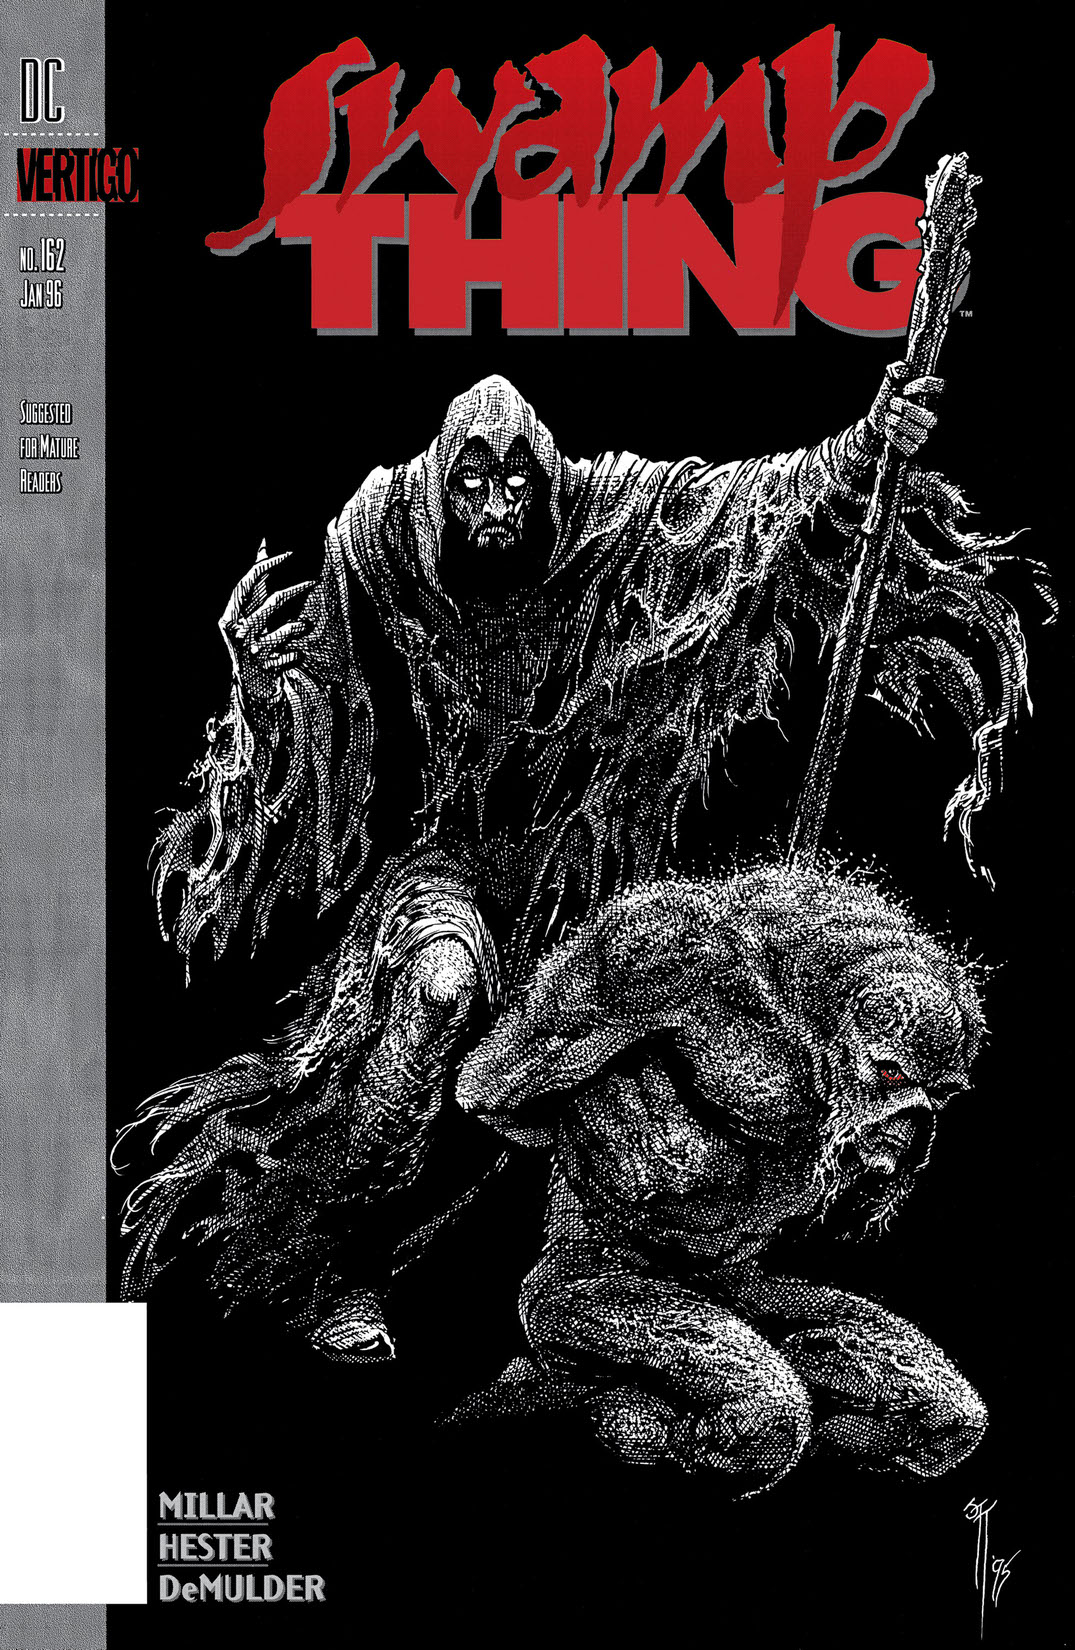 Swamp Thing (1985-) #162 preview images